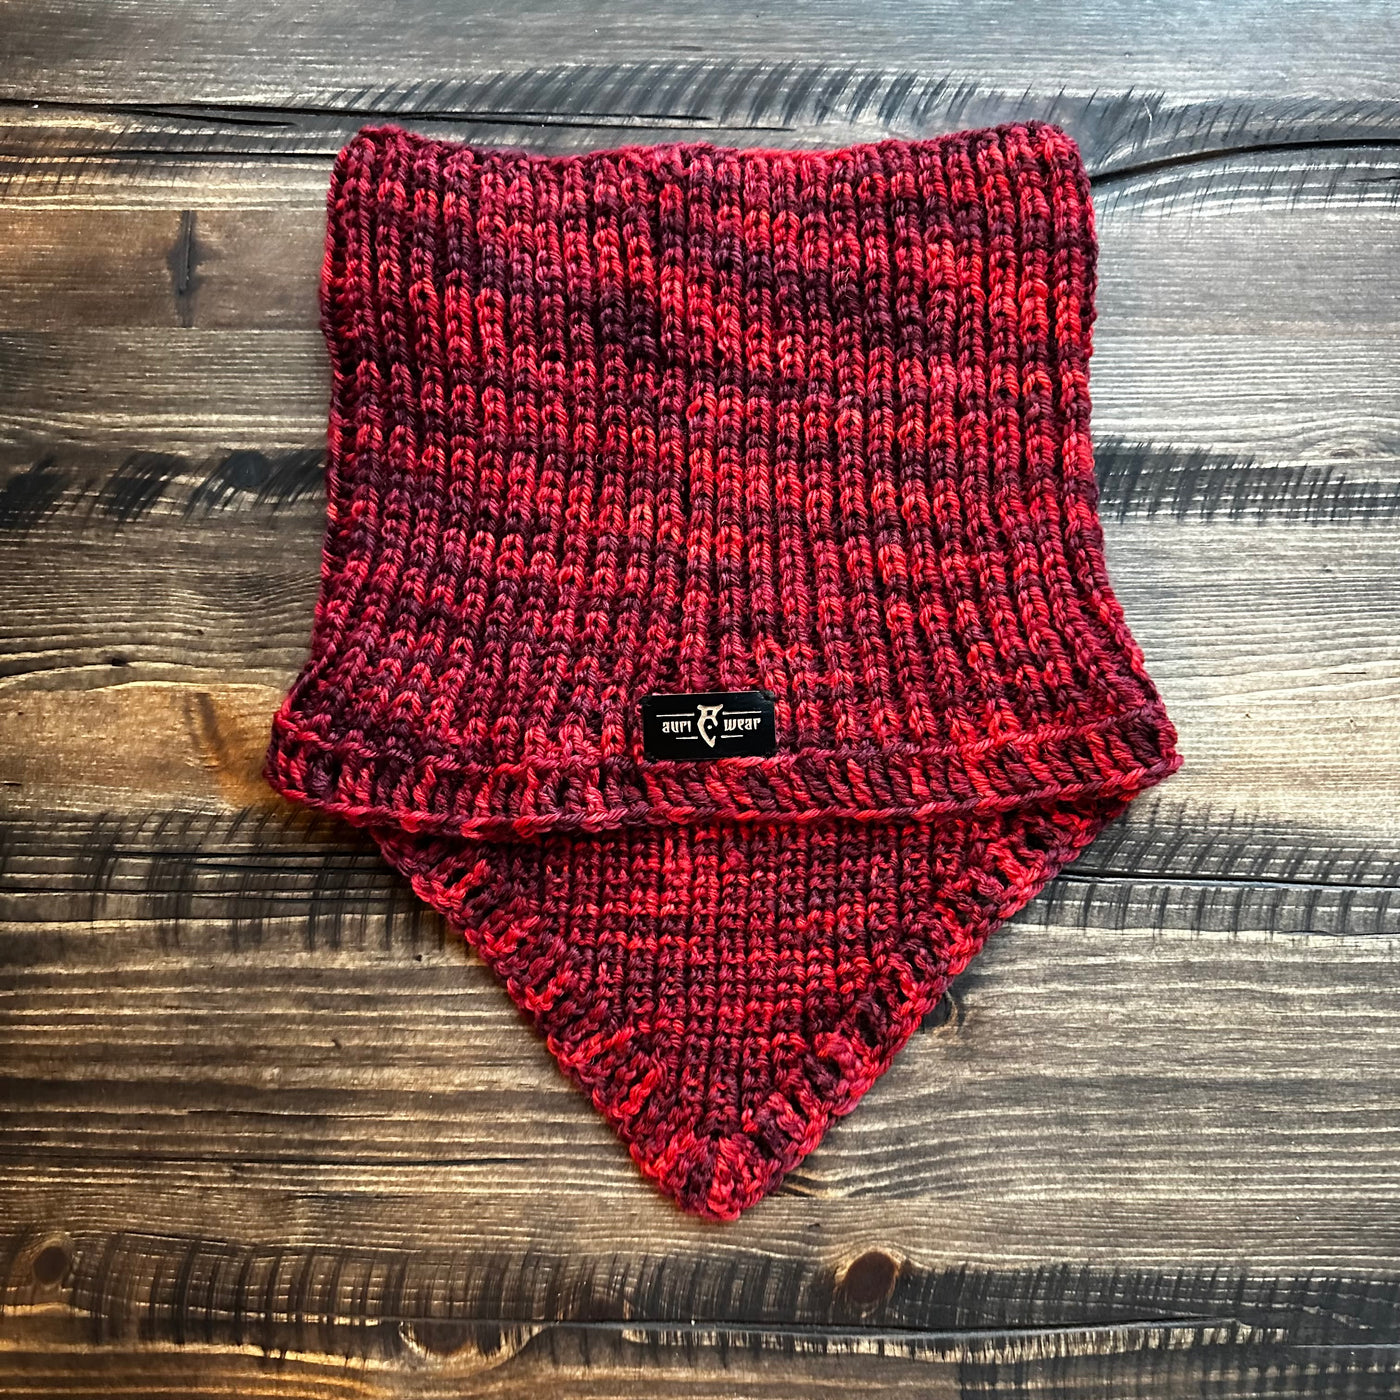 EOM Lively Red "Candor" Cowl